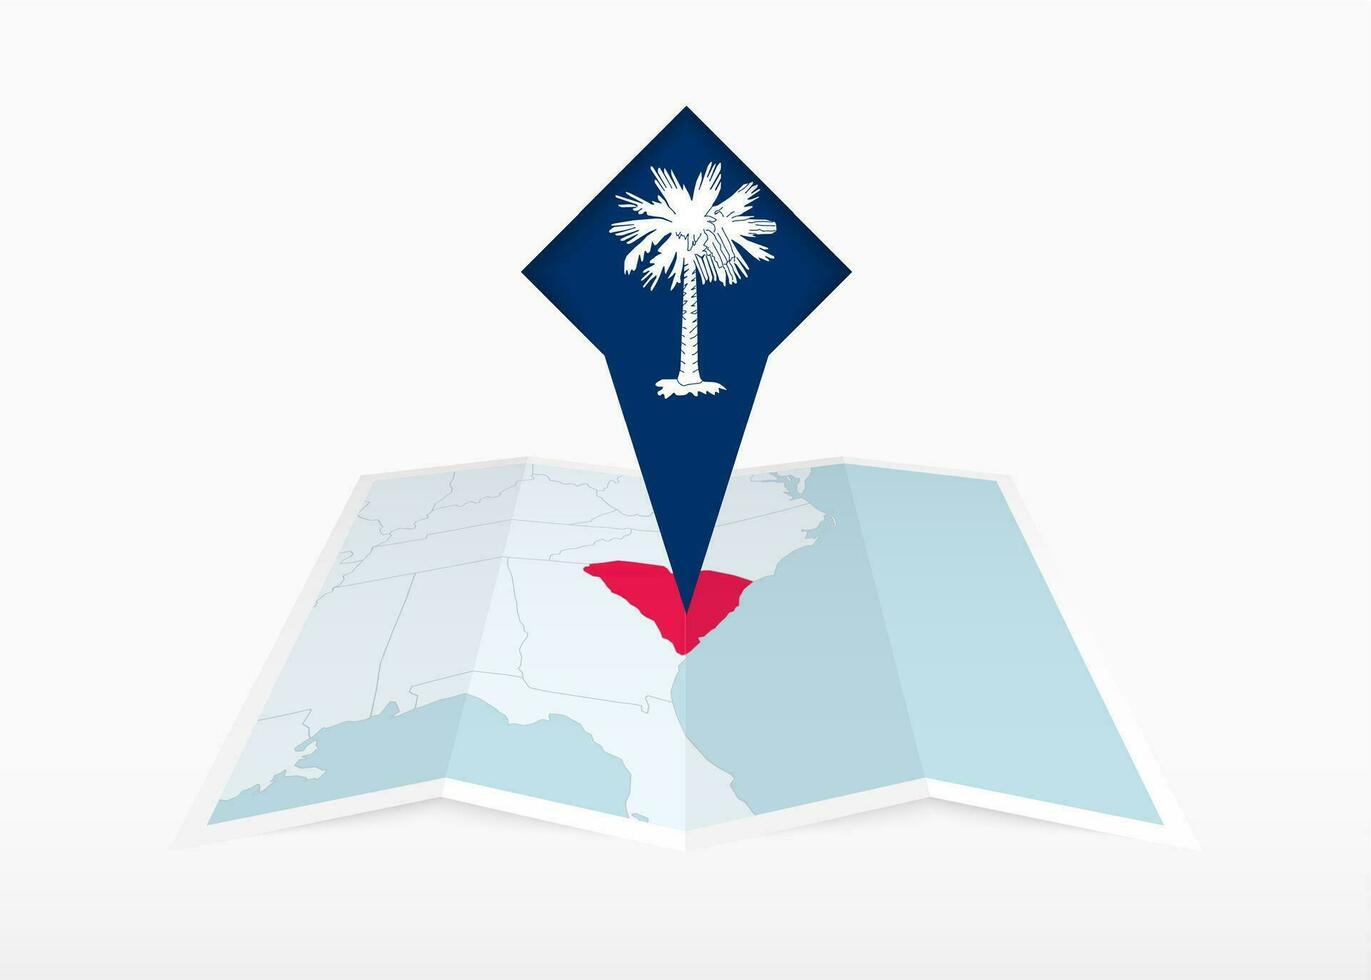 South Carolina is depicted on a folded paper map and pinned location marker with flag of South Carolina. vector